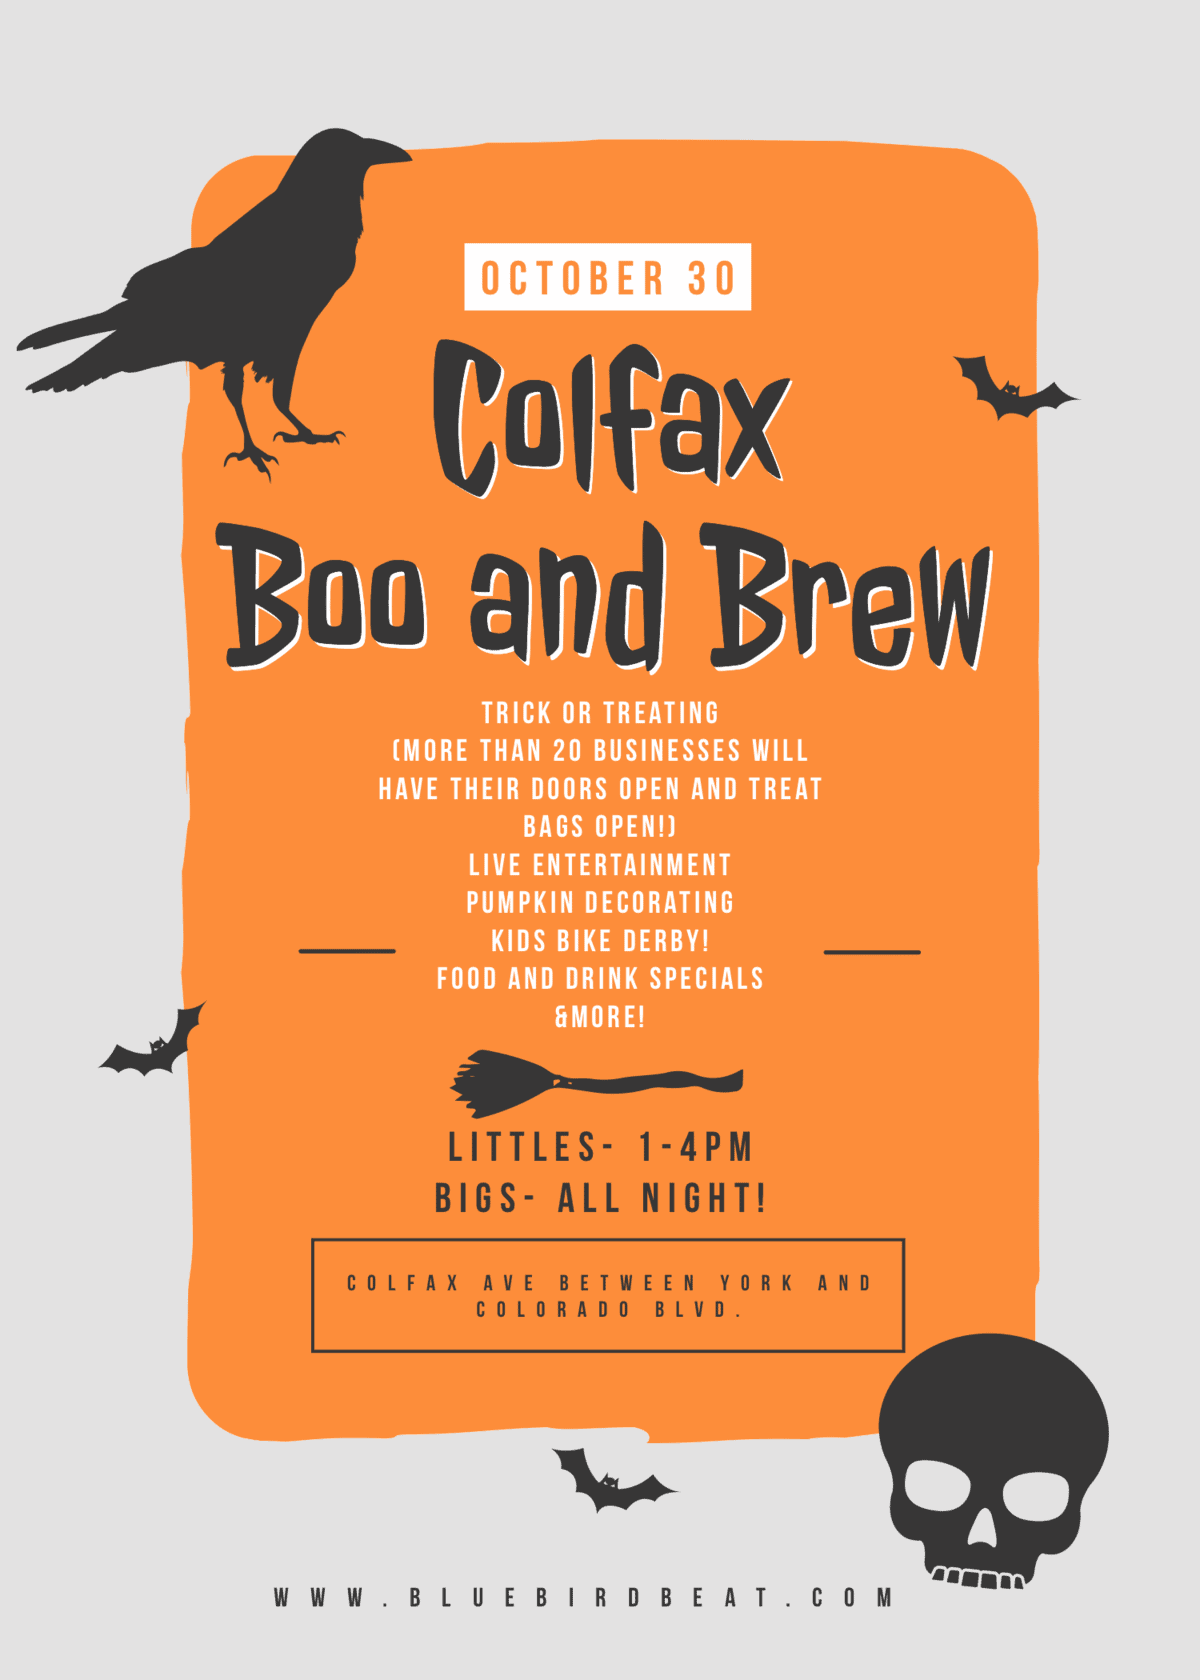 Get spooky with us at Boo n’ Brew!